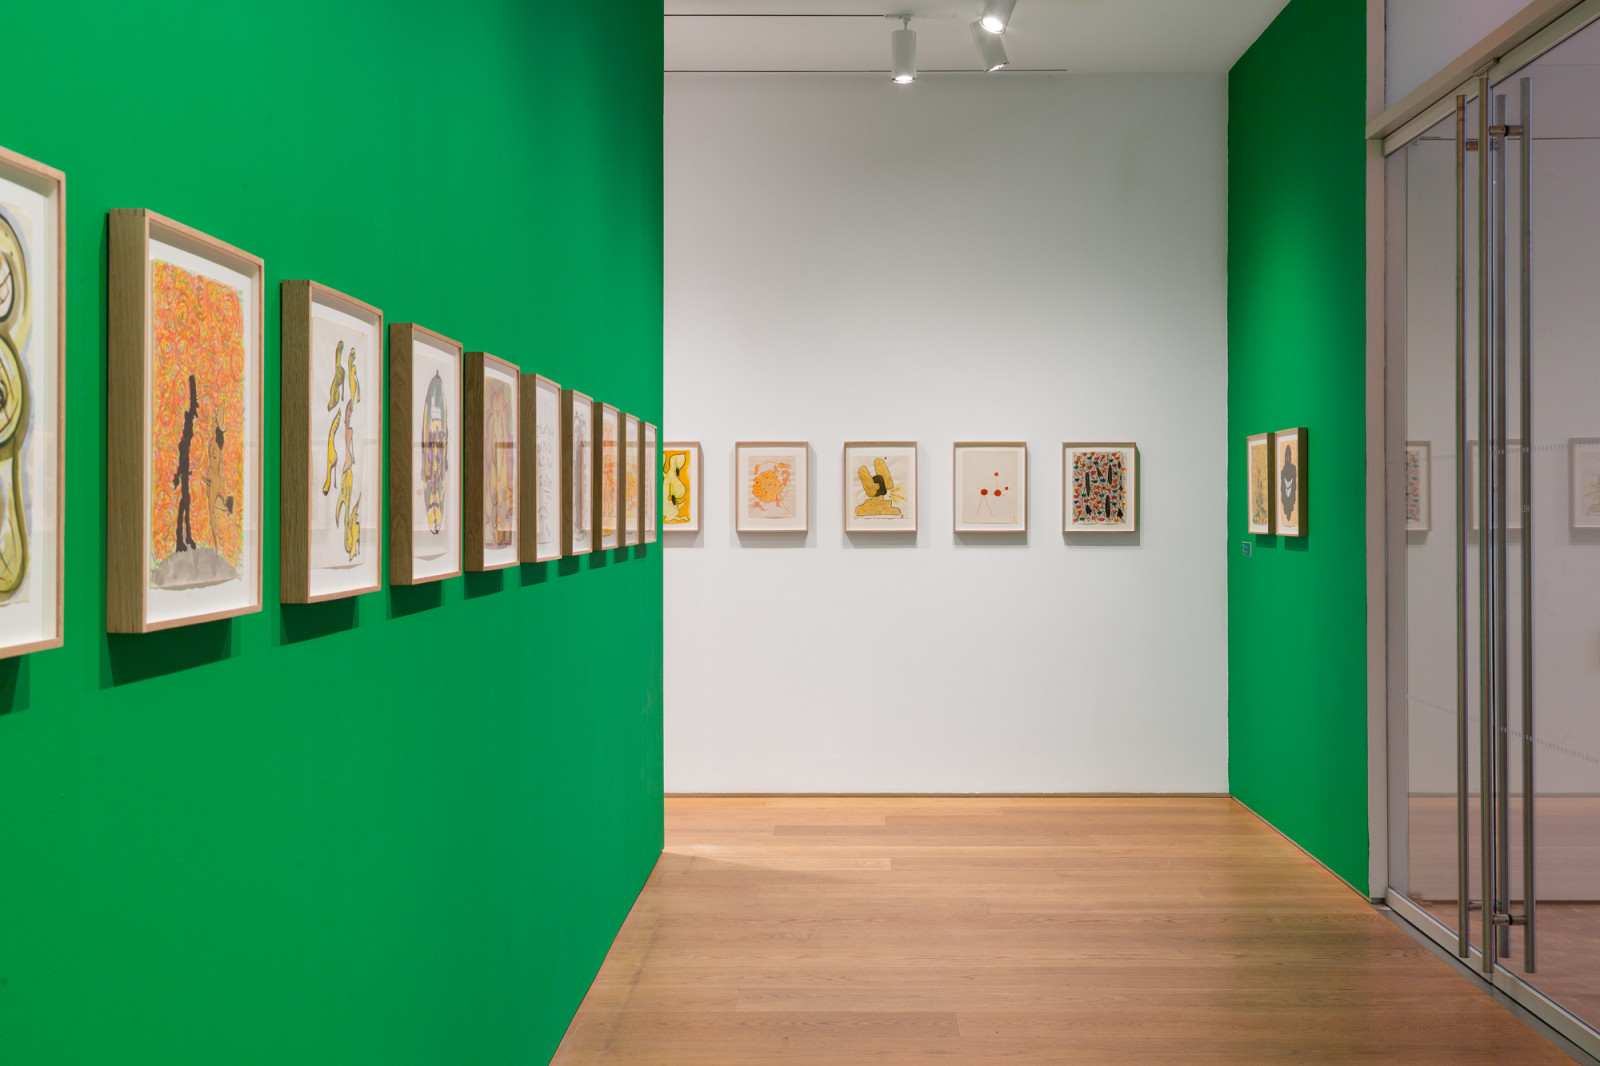 <div class="image_caption_container"><div class="image_caption"><p>Exhibition view: <strong>Ecce Homo: The Drawings of General Idea</strong>, The Drawing Center, New York, 2022. Photo © Daniel Terna</p></div></div>